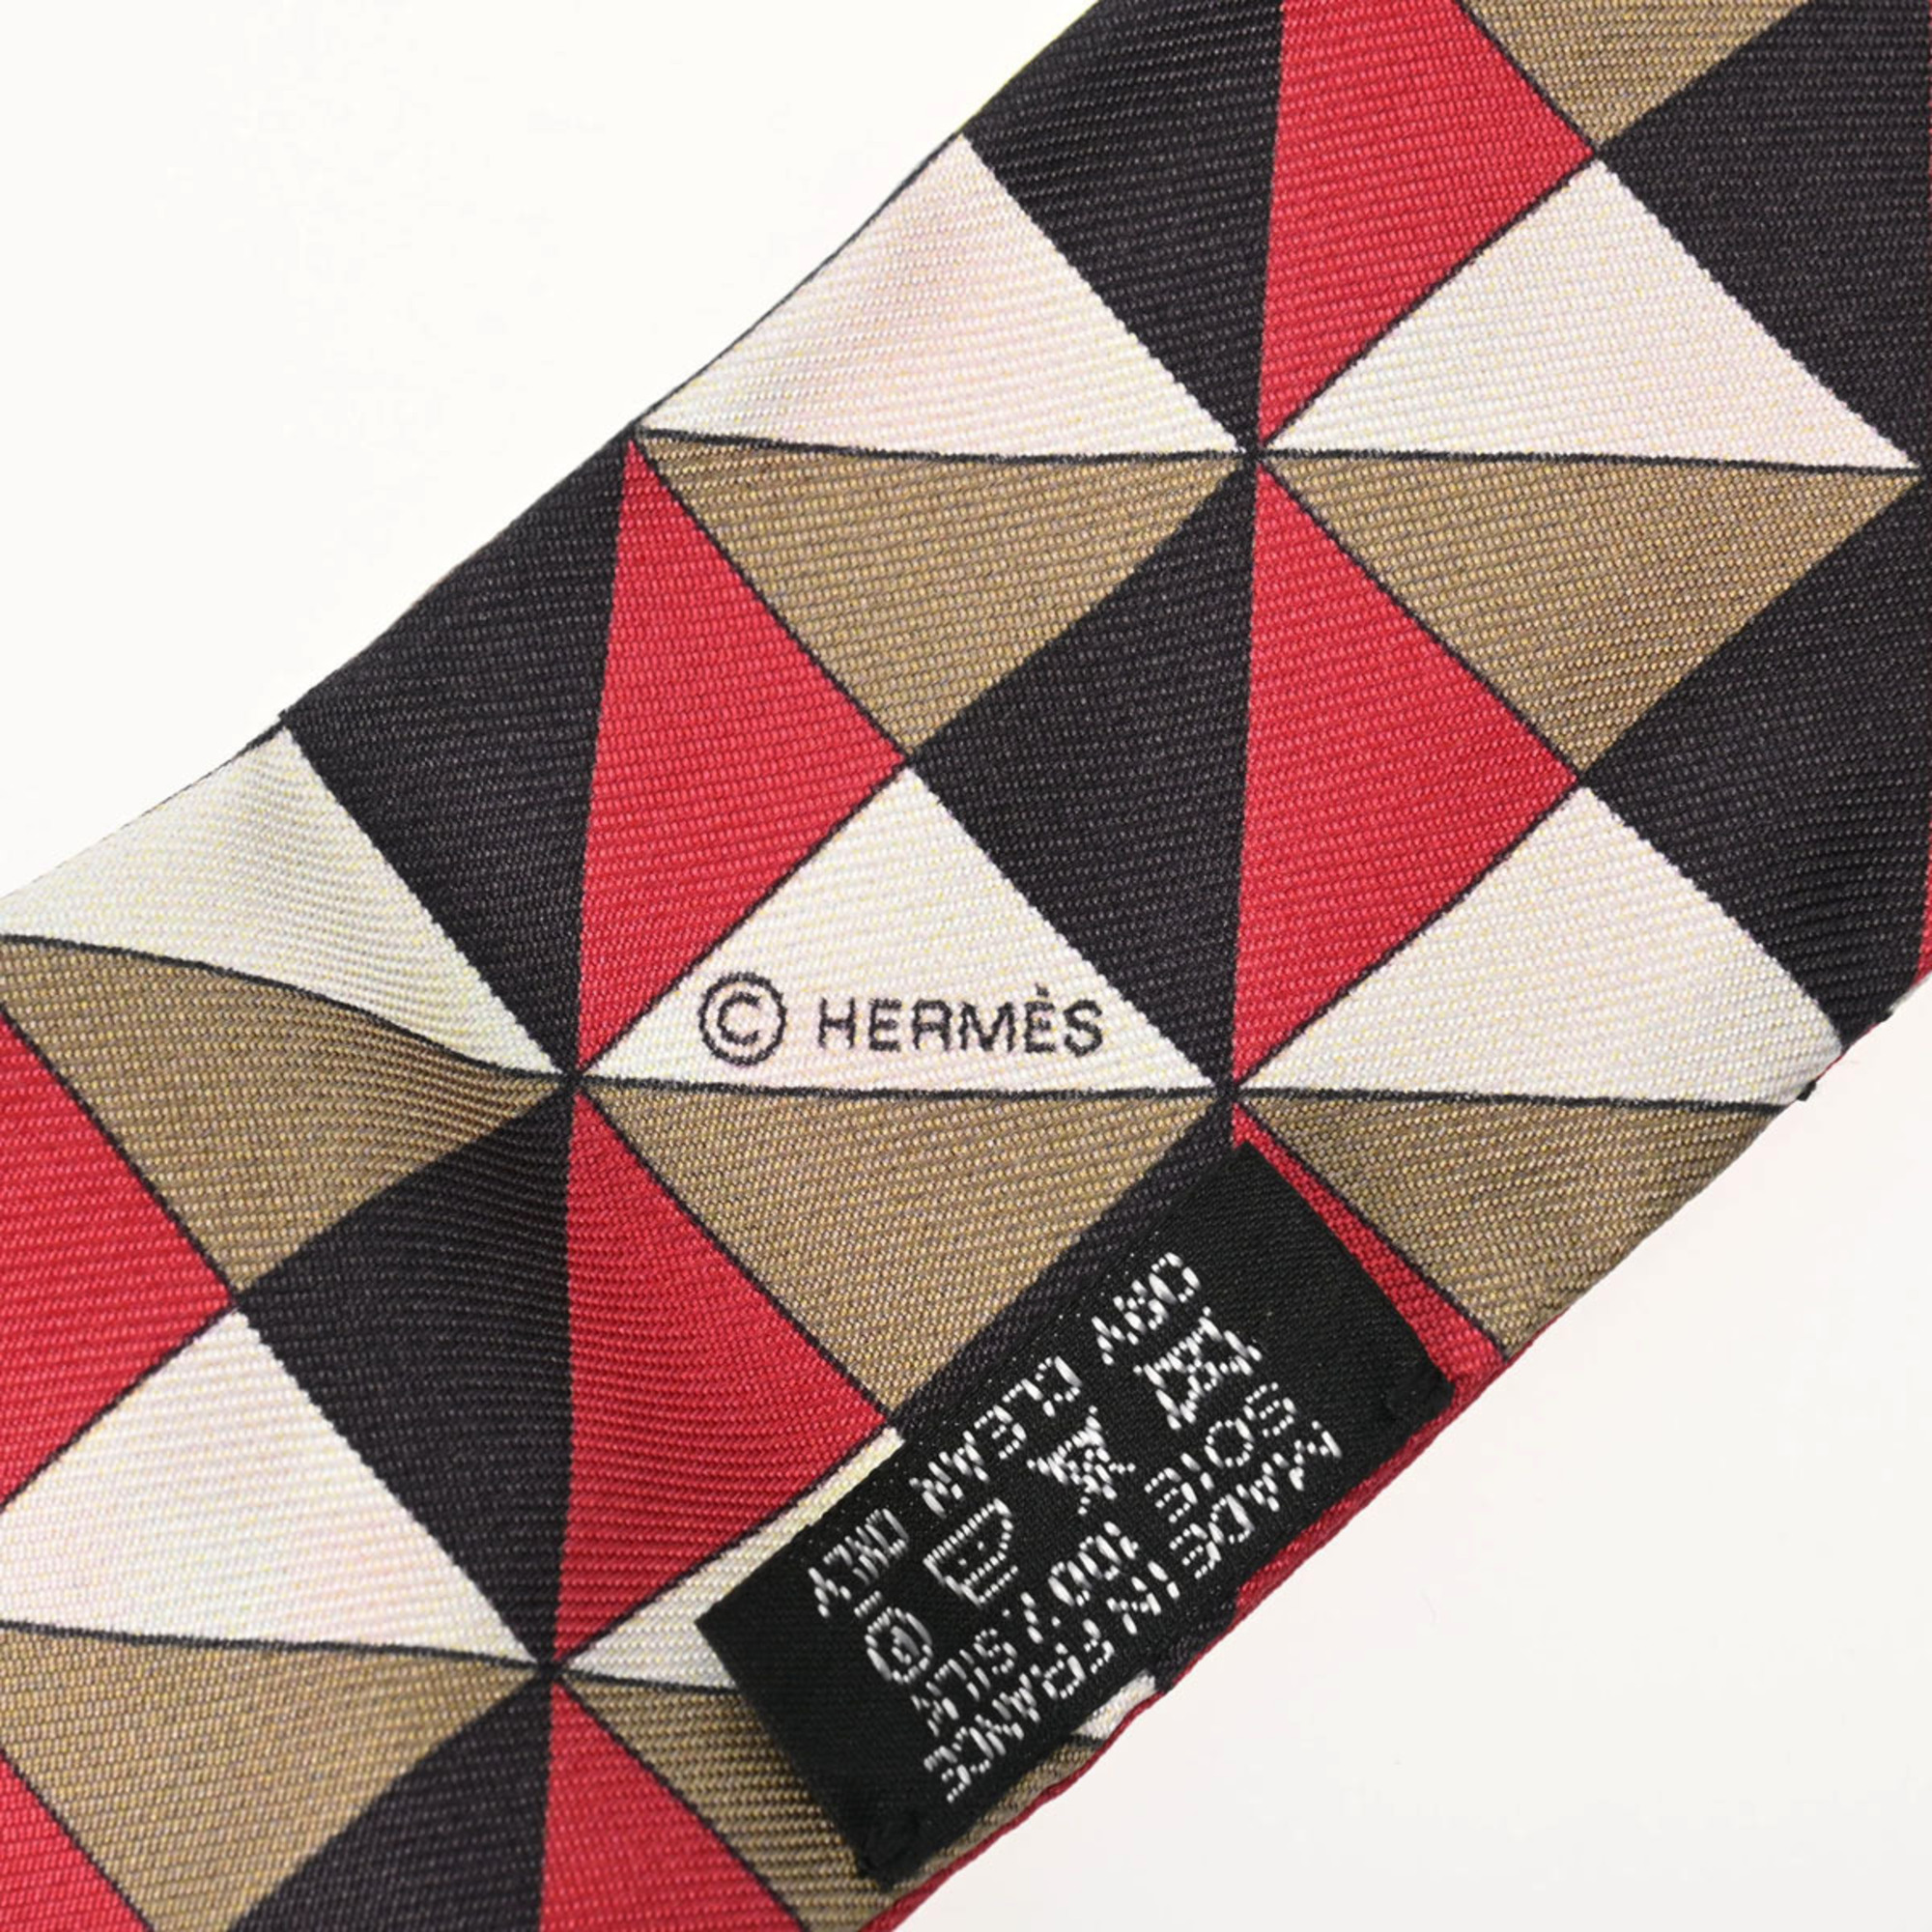 HERMES Twilly SOIE PSYCHE Old Tag Noir/Rouge/Anise - Women's 100% Silk Scarf Muffler